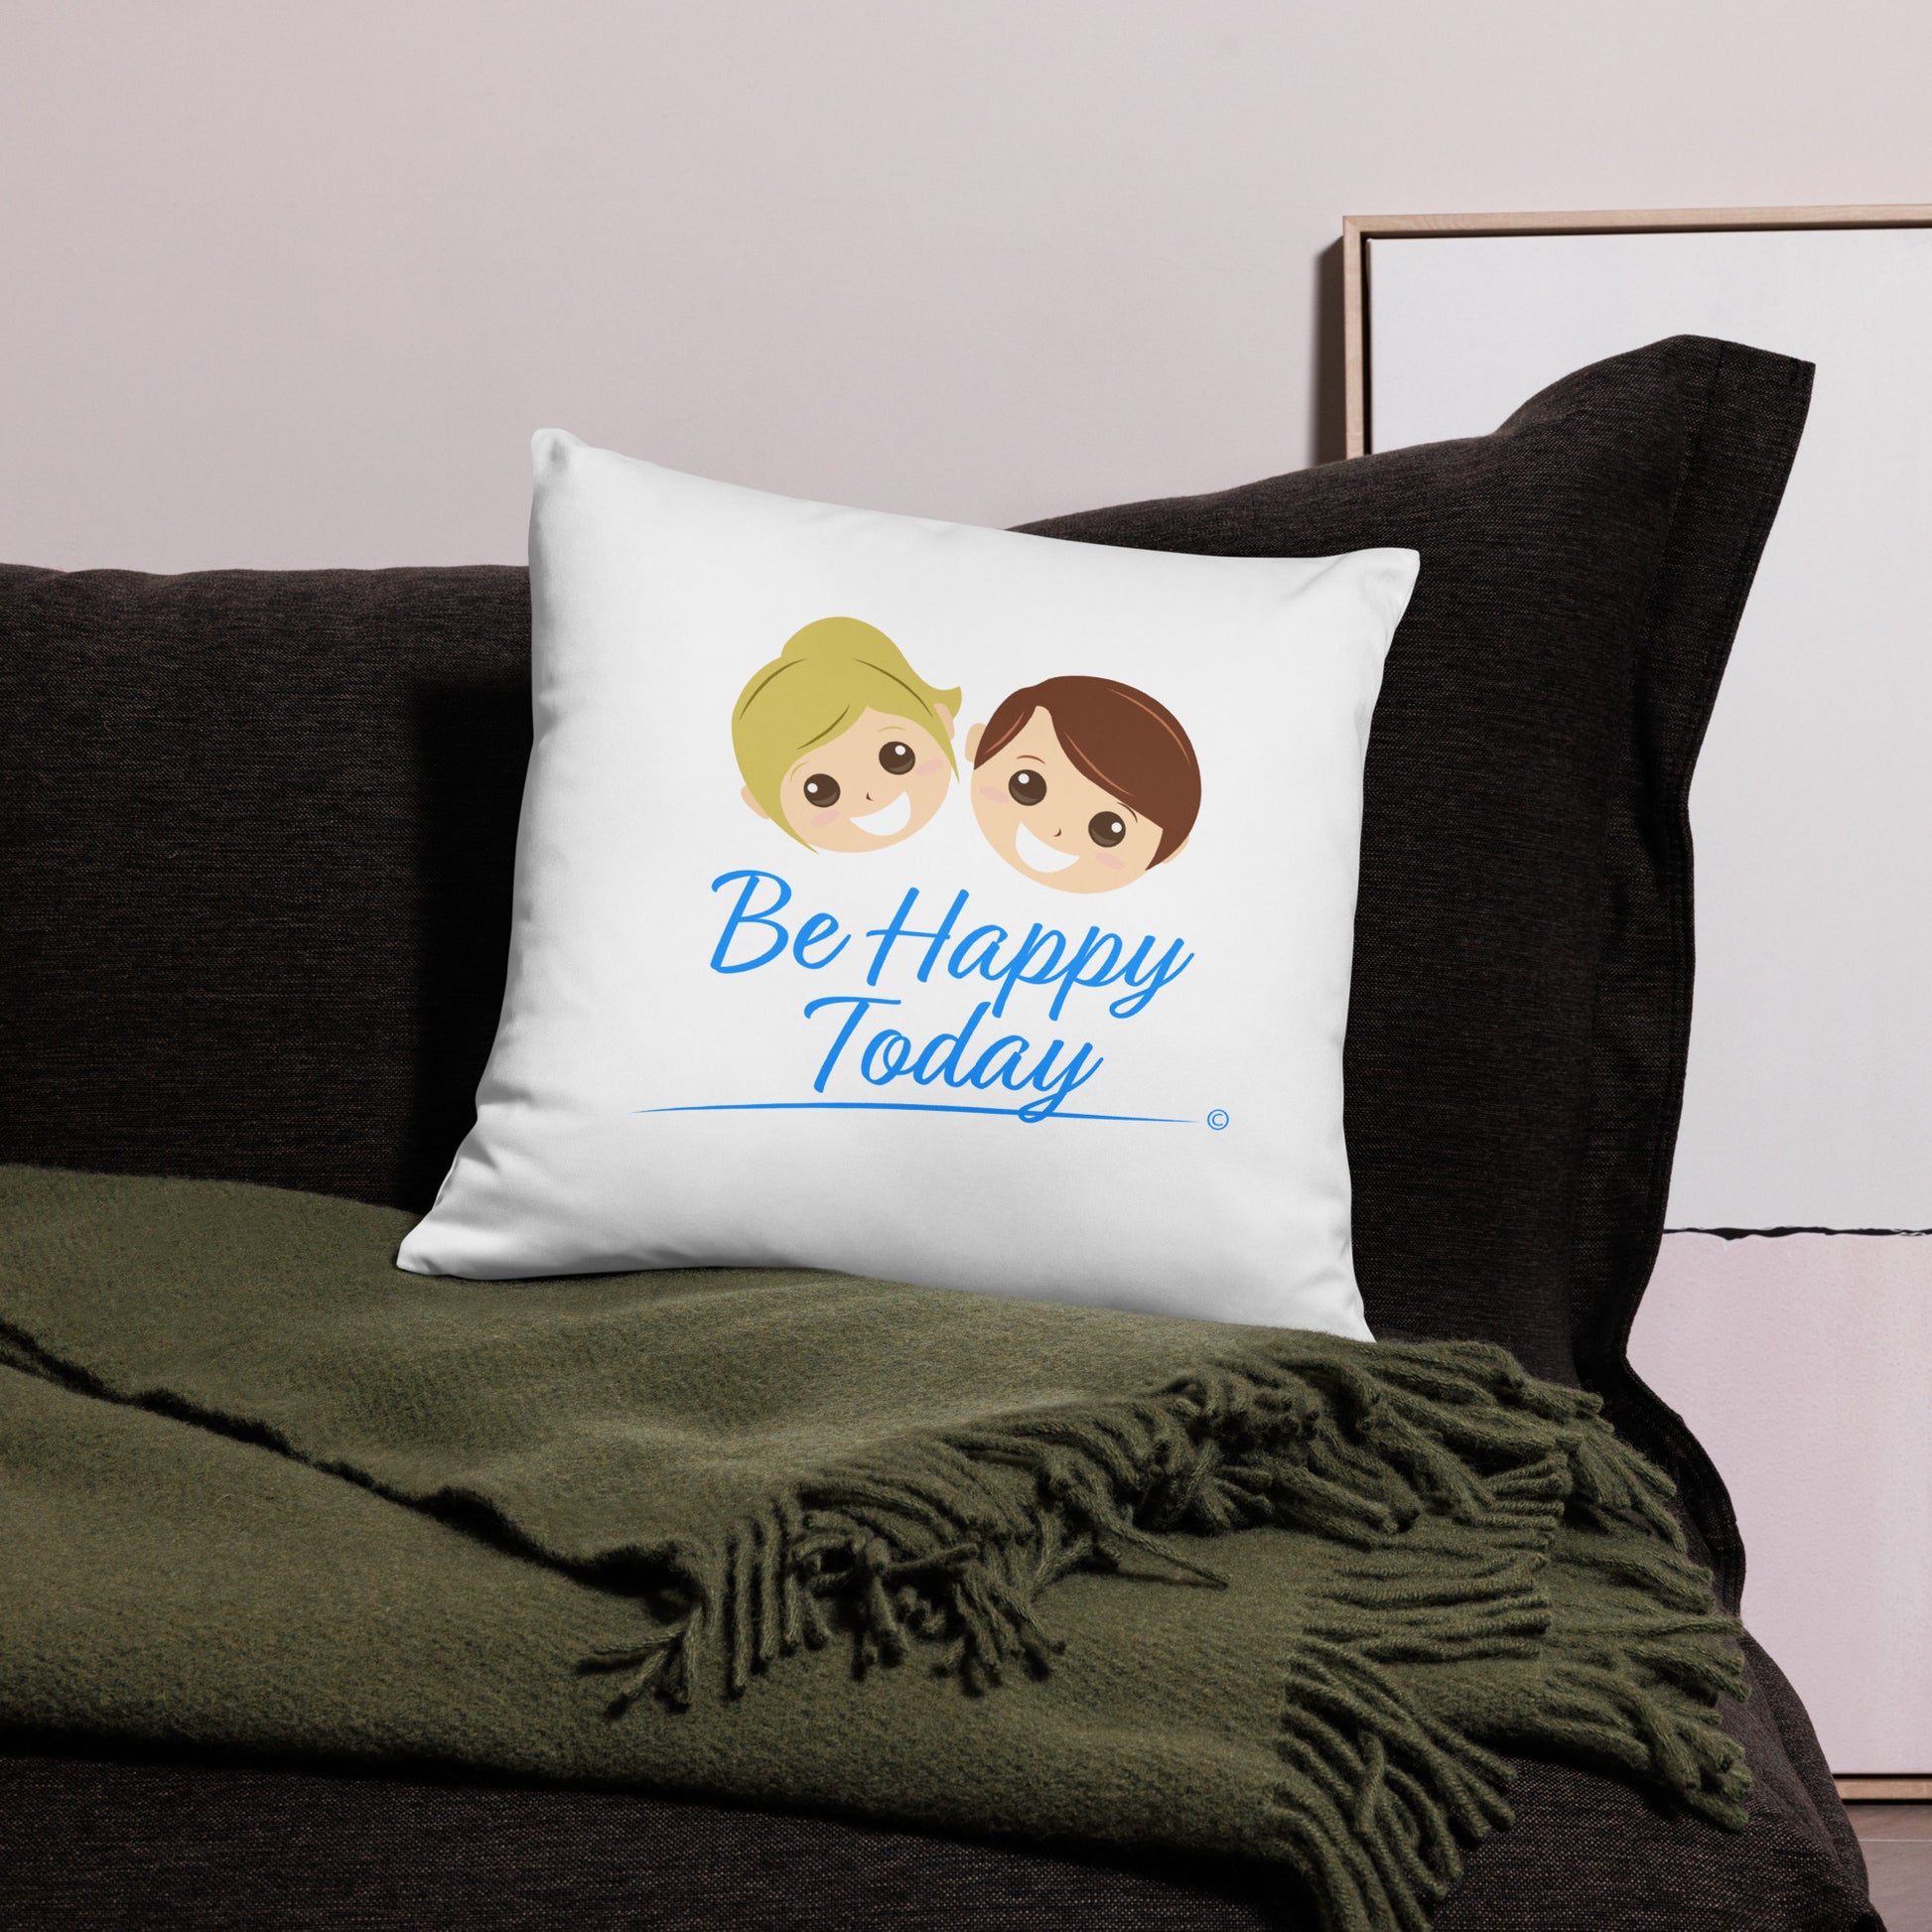 Inviting 18x18 accent pillow encouraging happiness with 'Be Happy Today,' beautifully placed on a black bed with a lively green scarf.